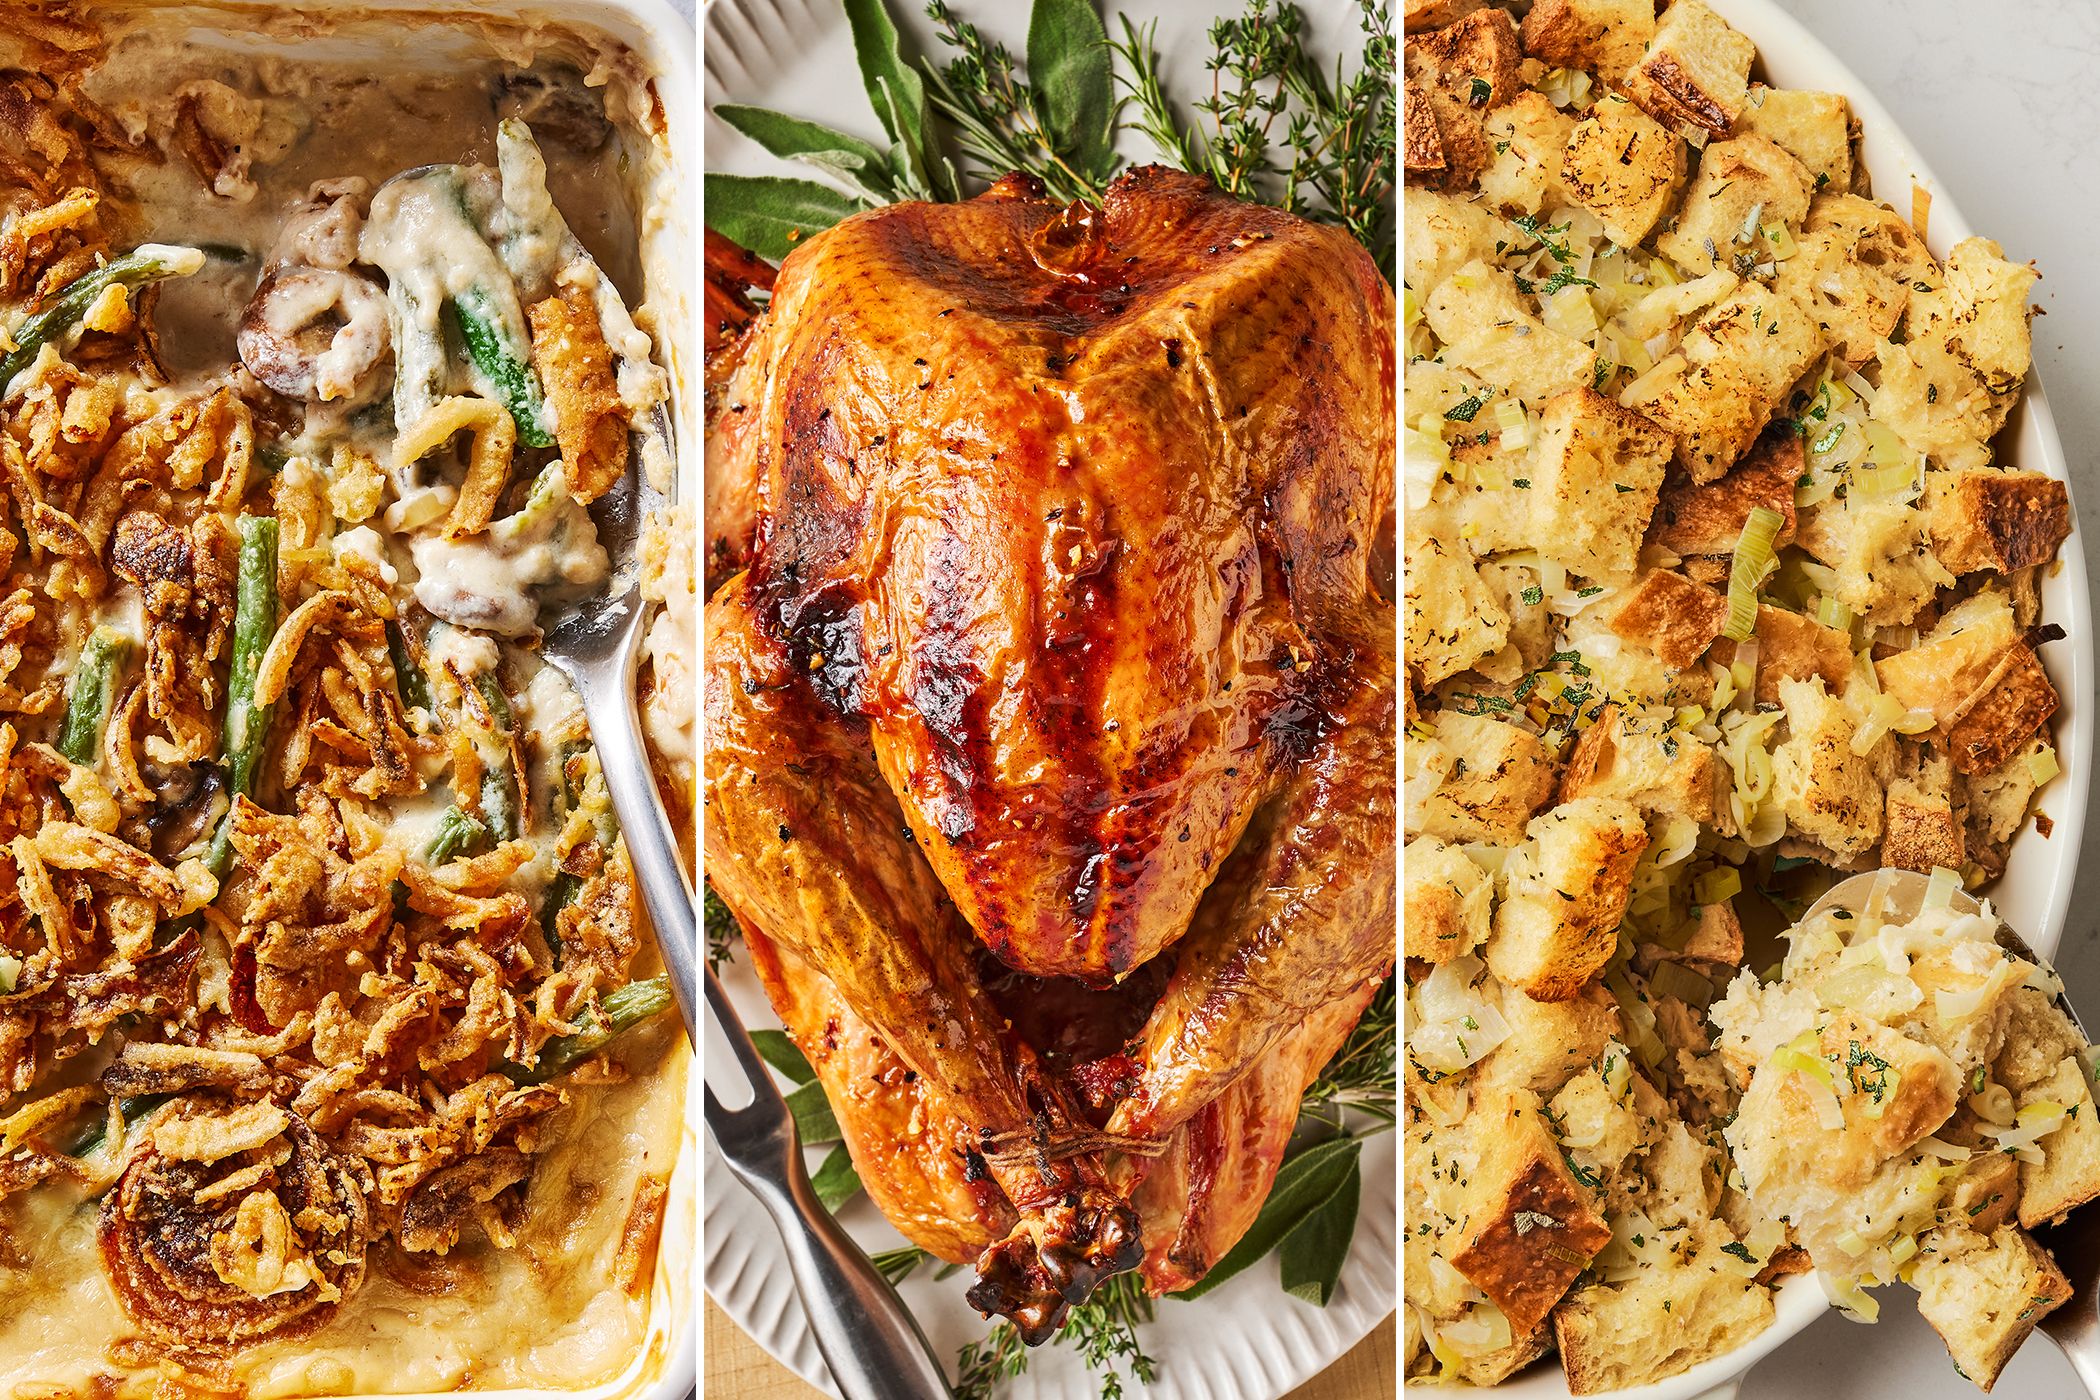 A Traditional Easy Thanksgiving Dinner Menu For 4 - An Edible Mosaic™